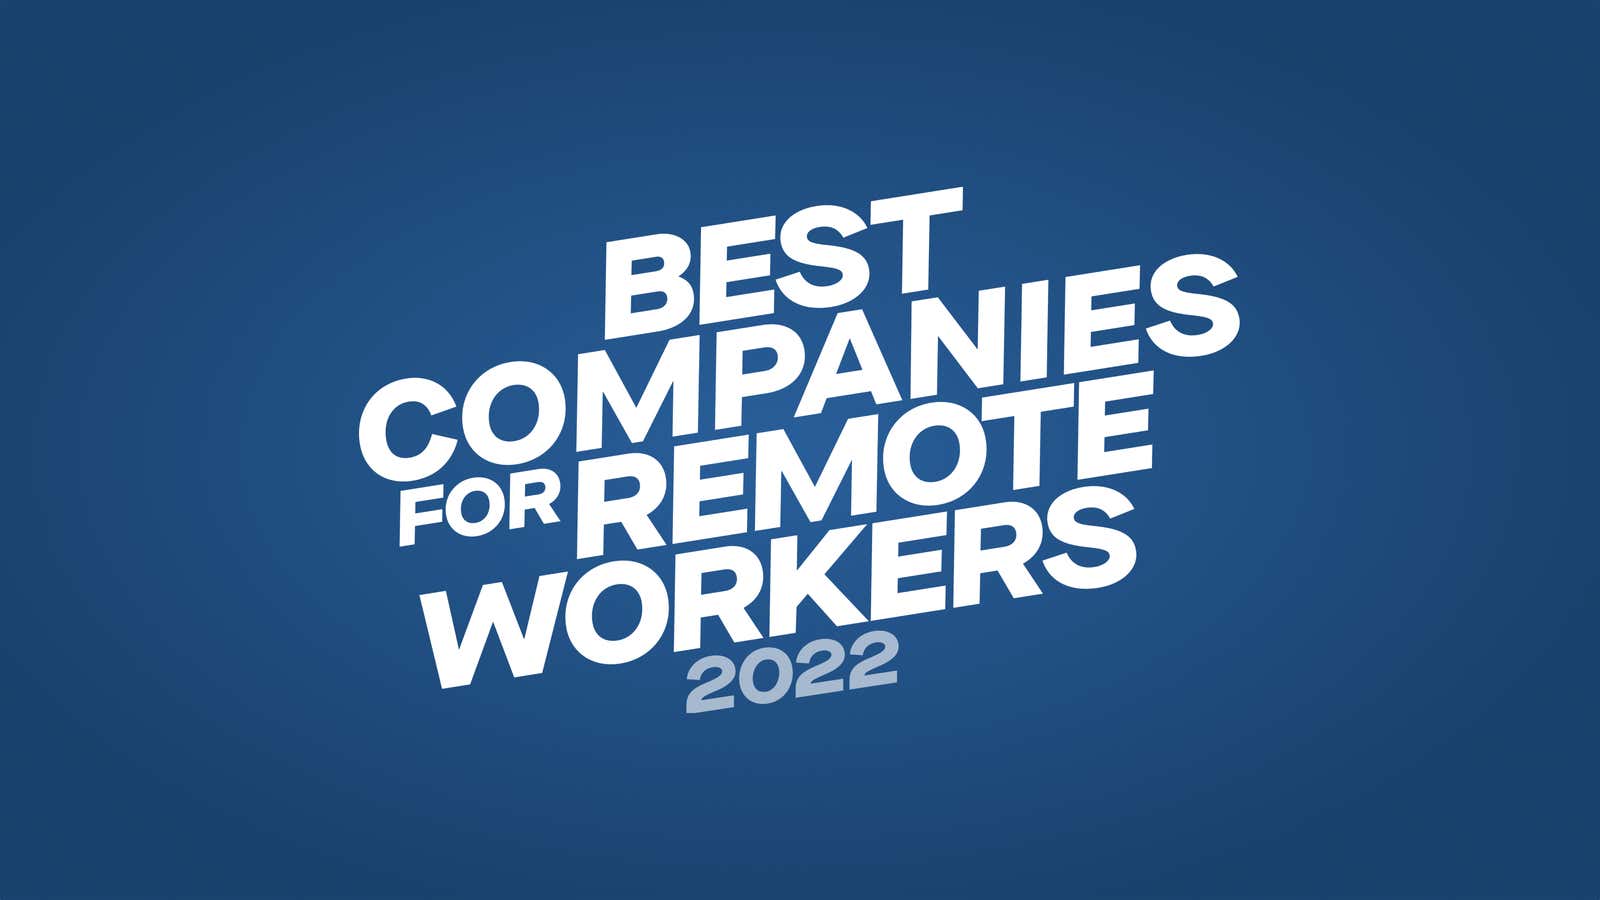 Submit your company for Quartz’s Best Companies for Remote Workers 2022 list